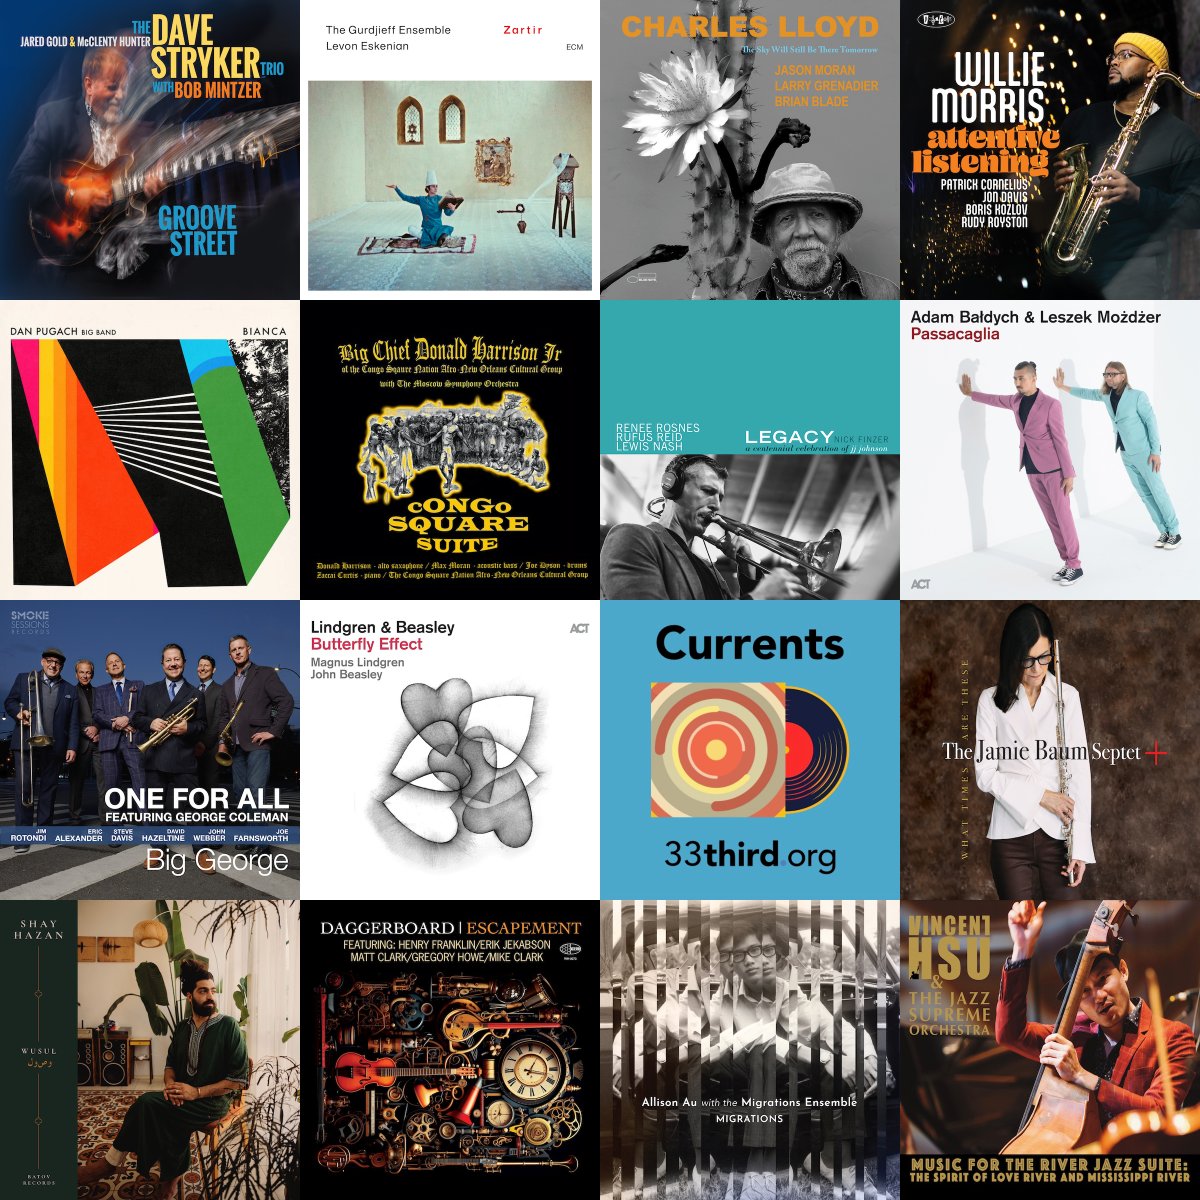 Jazz is a compendium of artistic ambition that stretches the art form into a mosaic of intriguing musical opportunities. Hear them all on Currents - your soundtrack to the future voice of Jazz! bit.ly/currents-stream #Currents #33third.org #Jazz #JazzRadio